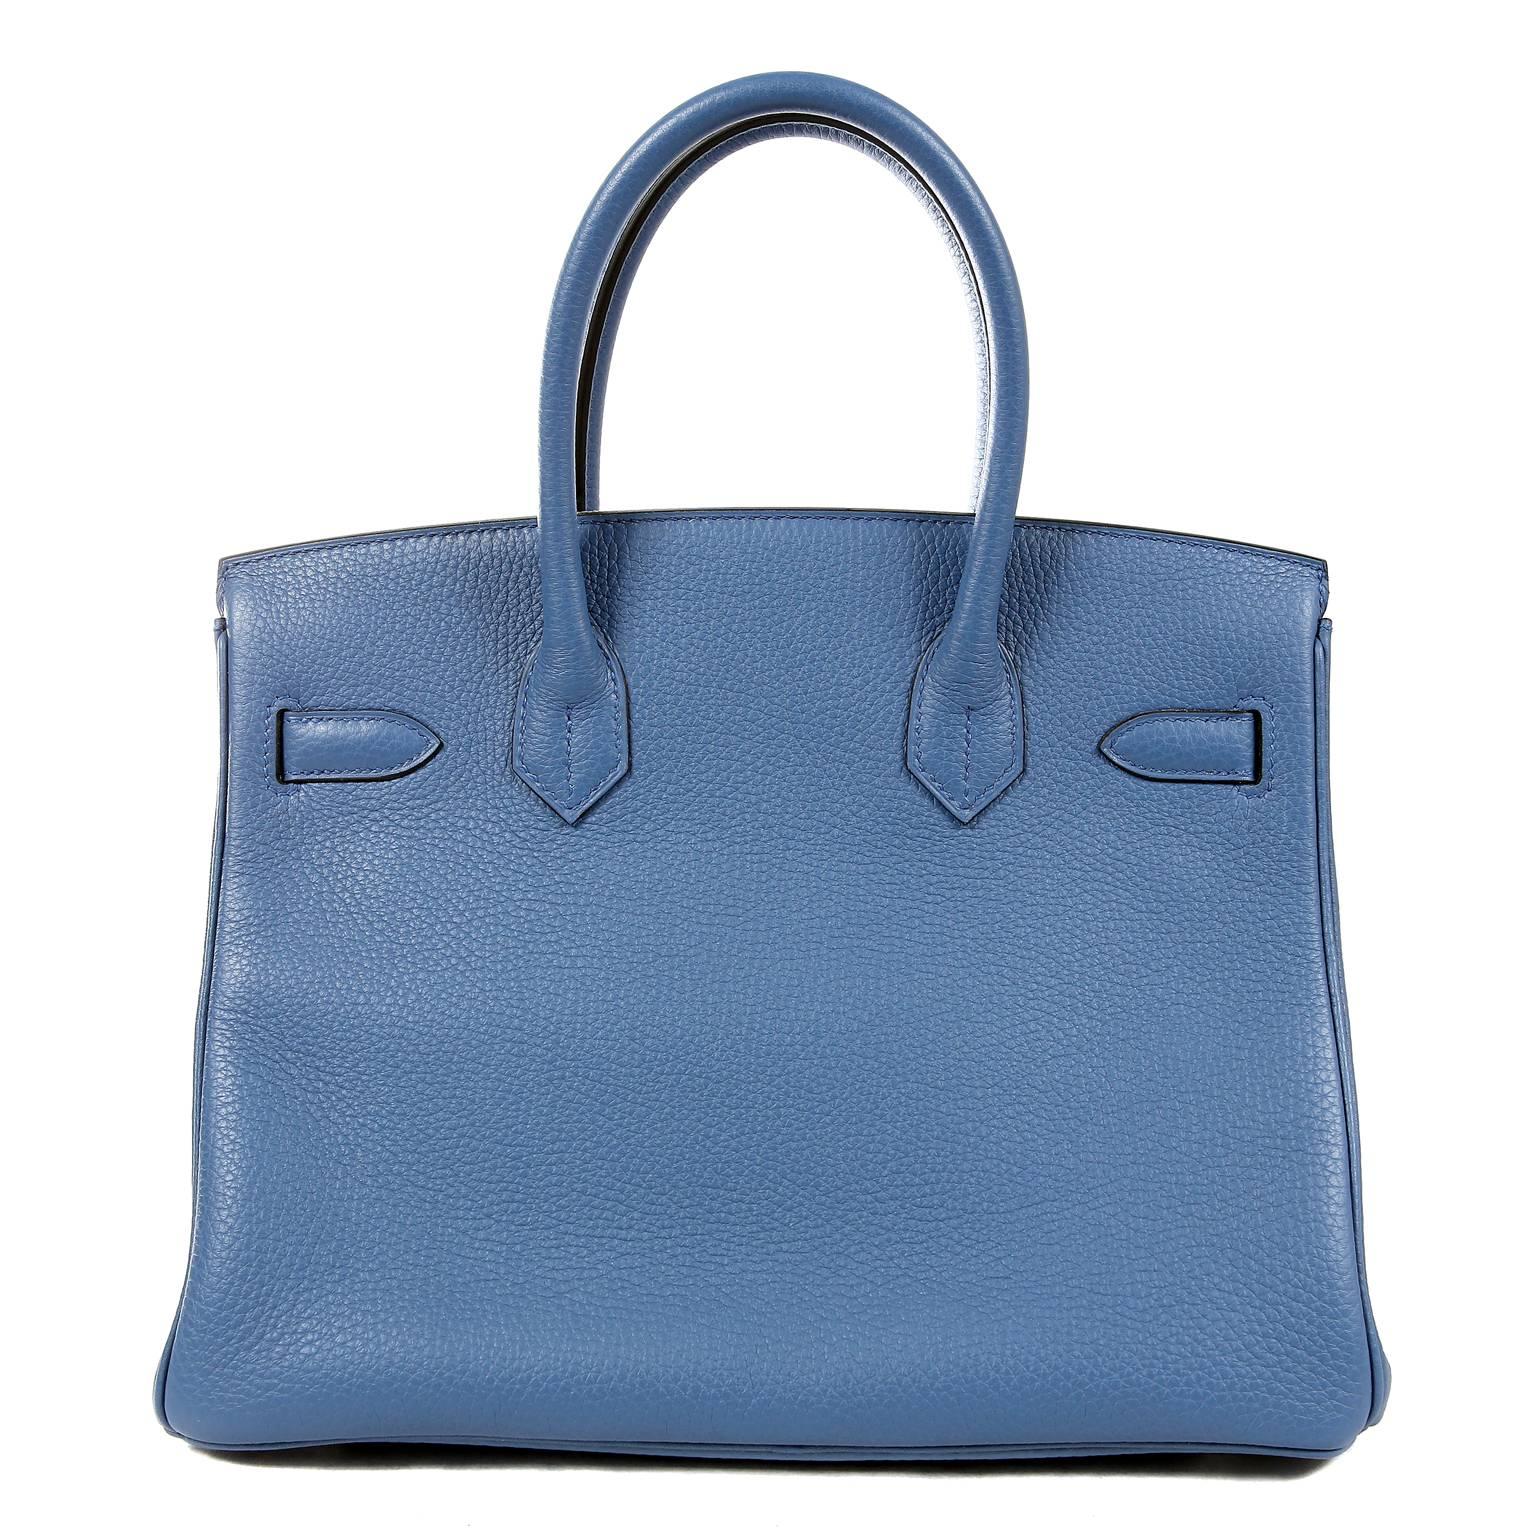 Hermès Blue Azur Togo 30 cm Birkin Bag- PRISTINE; Unworn with the protective plastic intact on the hardware.
Waitlists exceeding a year are commonplace for the intensely coveted Birkin bag.  Each piece is hand crafted by skilled artisans and